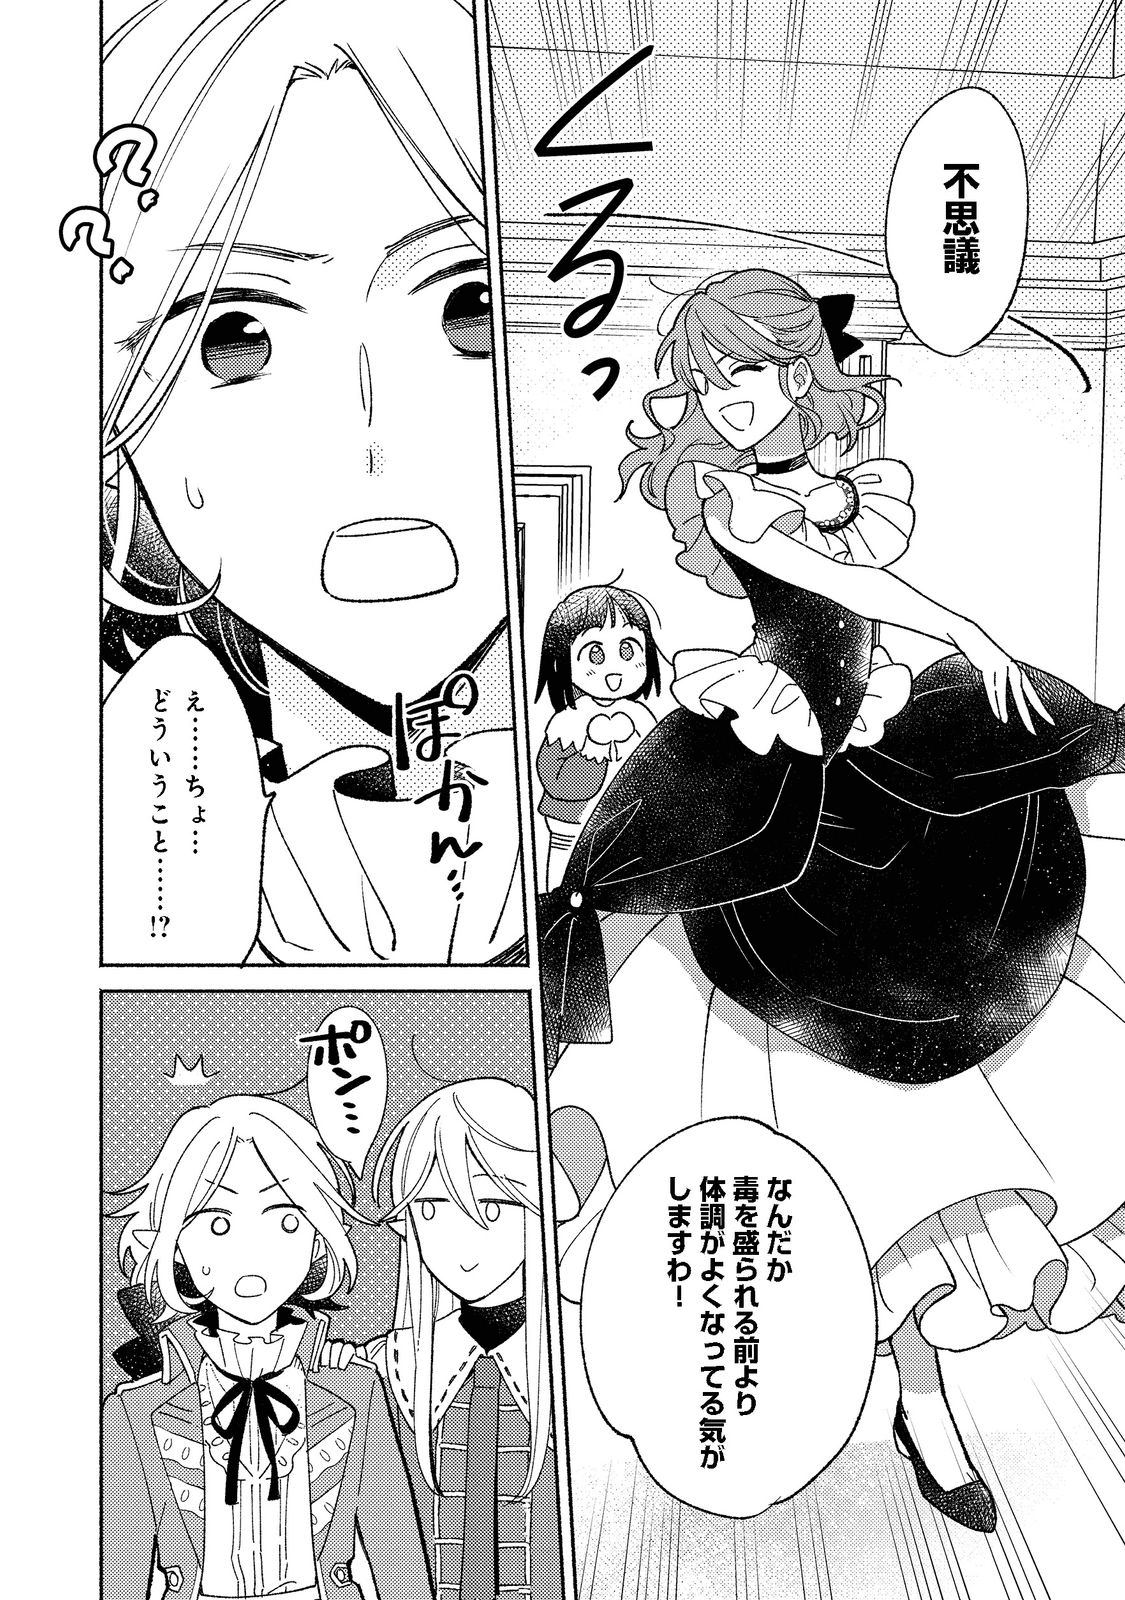 I’m the White Pig Nobleman 第15.2話 - Page 2